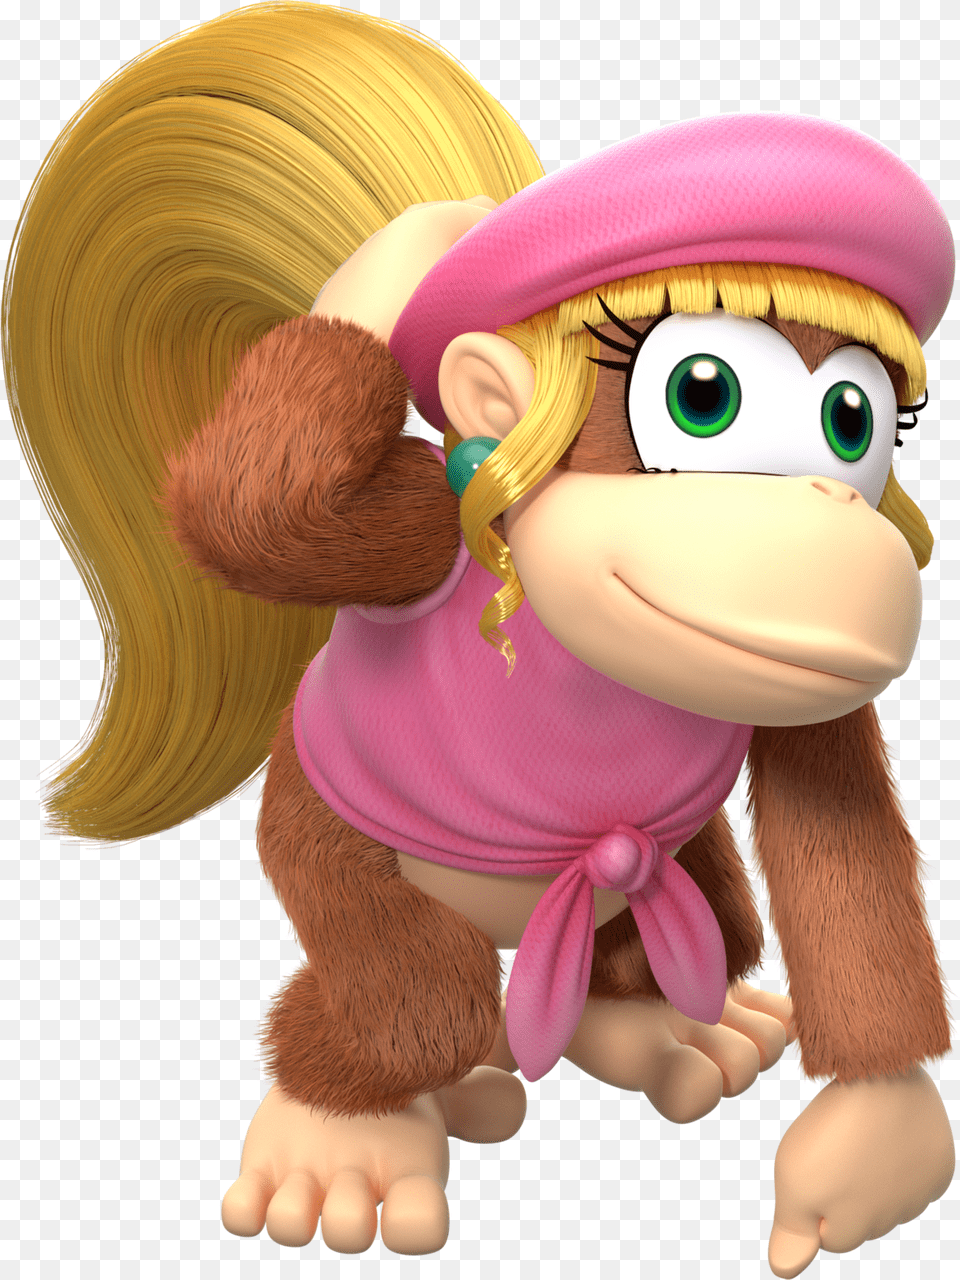 Dixie Kong The Protagonist Of Rare39s 1996 Quotdonkey Dixie Kong, Toy, Plush, Cartoon, Face Free Transparent Png